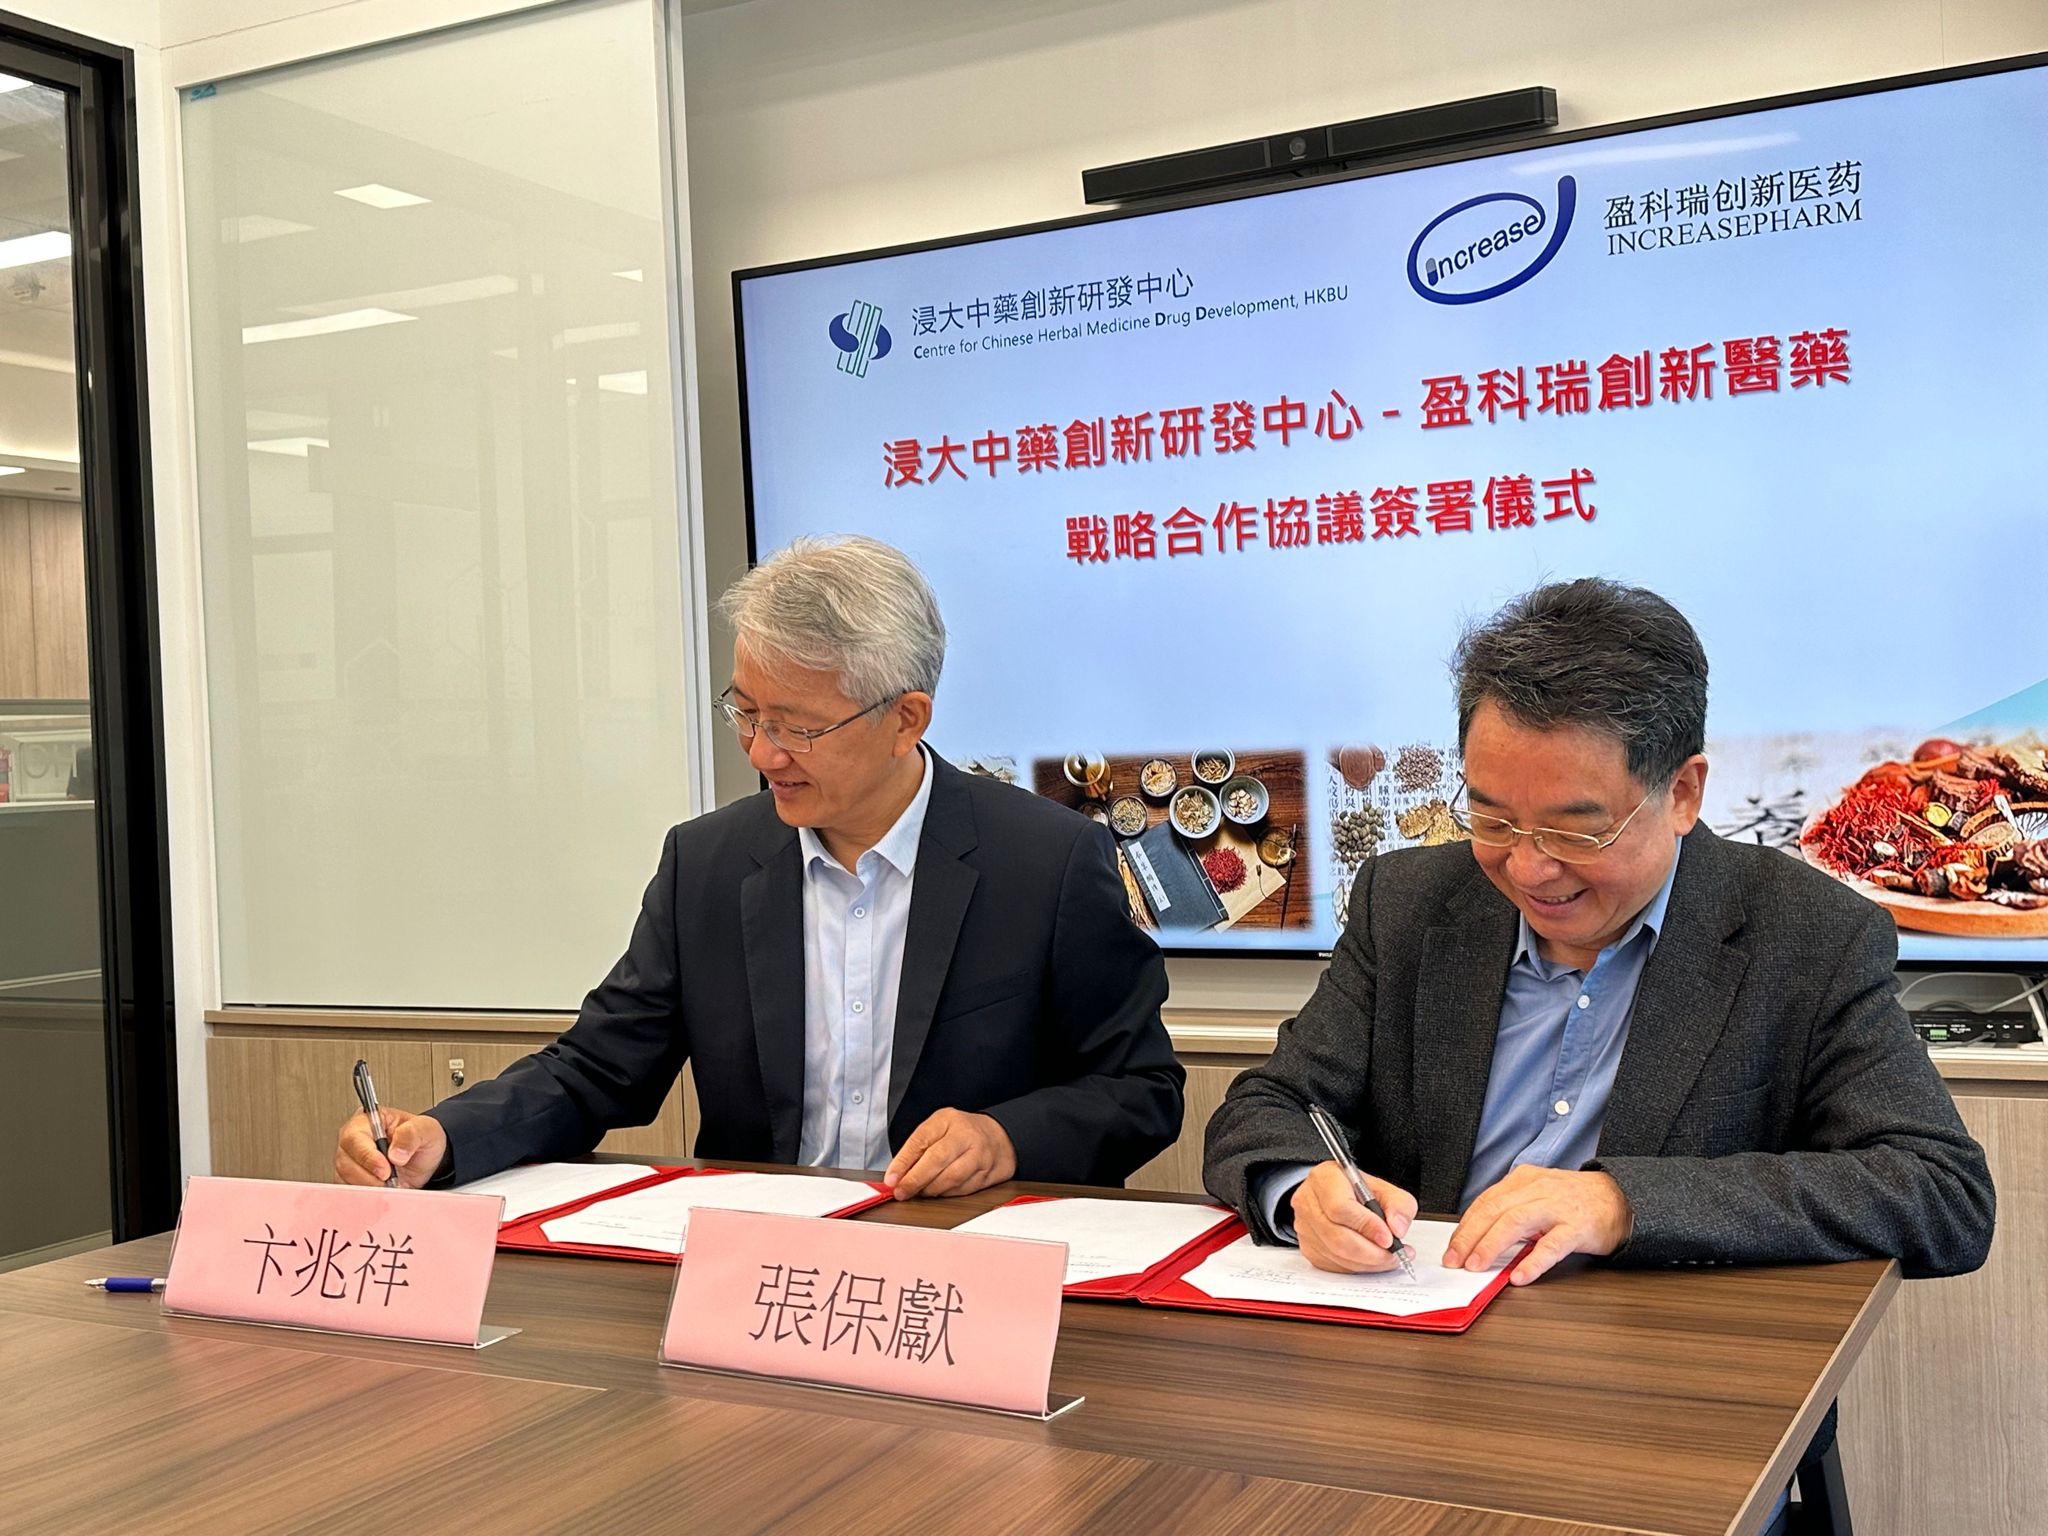 Centre for Chinese Herbal Medicine Drug Development and Beijing Increasepharm Corporation collaborate to develop Chinese medicine